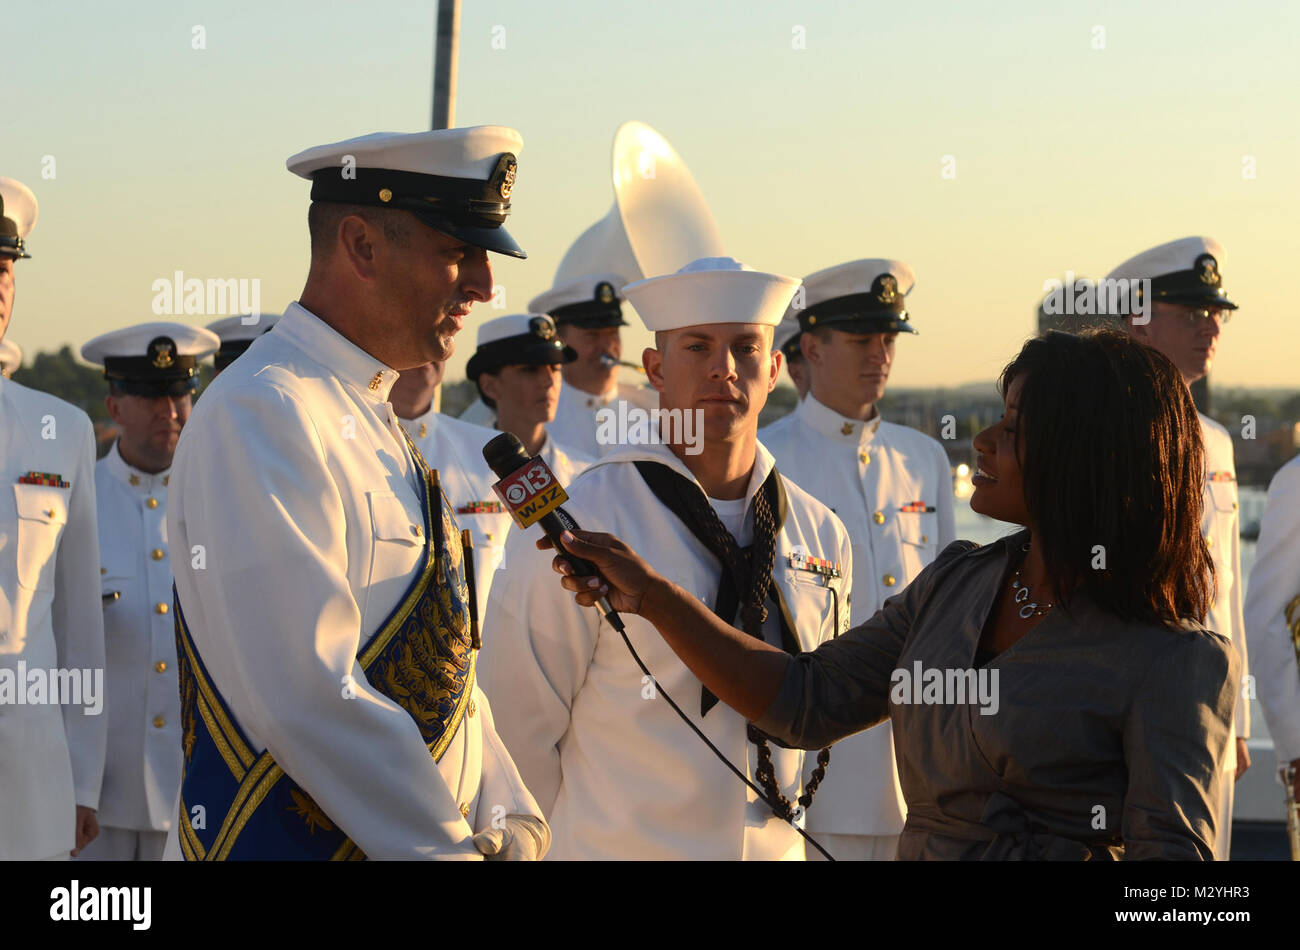 120615-N-HG258-097 BALTIMORE, MD (June 15, 2012) Senior Chief Musician Mike Bayes, left, assistant drum major with the U.S. Navy Ceremonial Band discusses the Navy Band's involvement in Sailabration 200 prior to a live broadcast aboard USS San Antonio (LPD 17) on Baltimore's WJZ Morning News. The Navy week is part of Baltimore's Star Spangled Sailabration and commemorates the bicentennial of the War of 1812 and the writing of the Star Spangled Banner. (U.S. Navy Photo by Chief Musician Stephen Hassay/Released) 120615-N-HG258-097 by United States Navy Band Stock Photo